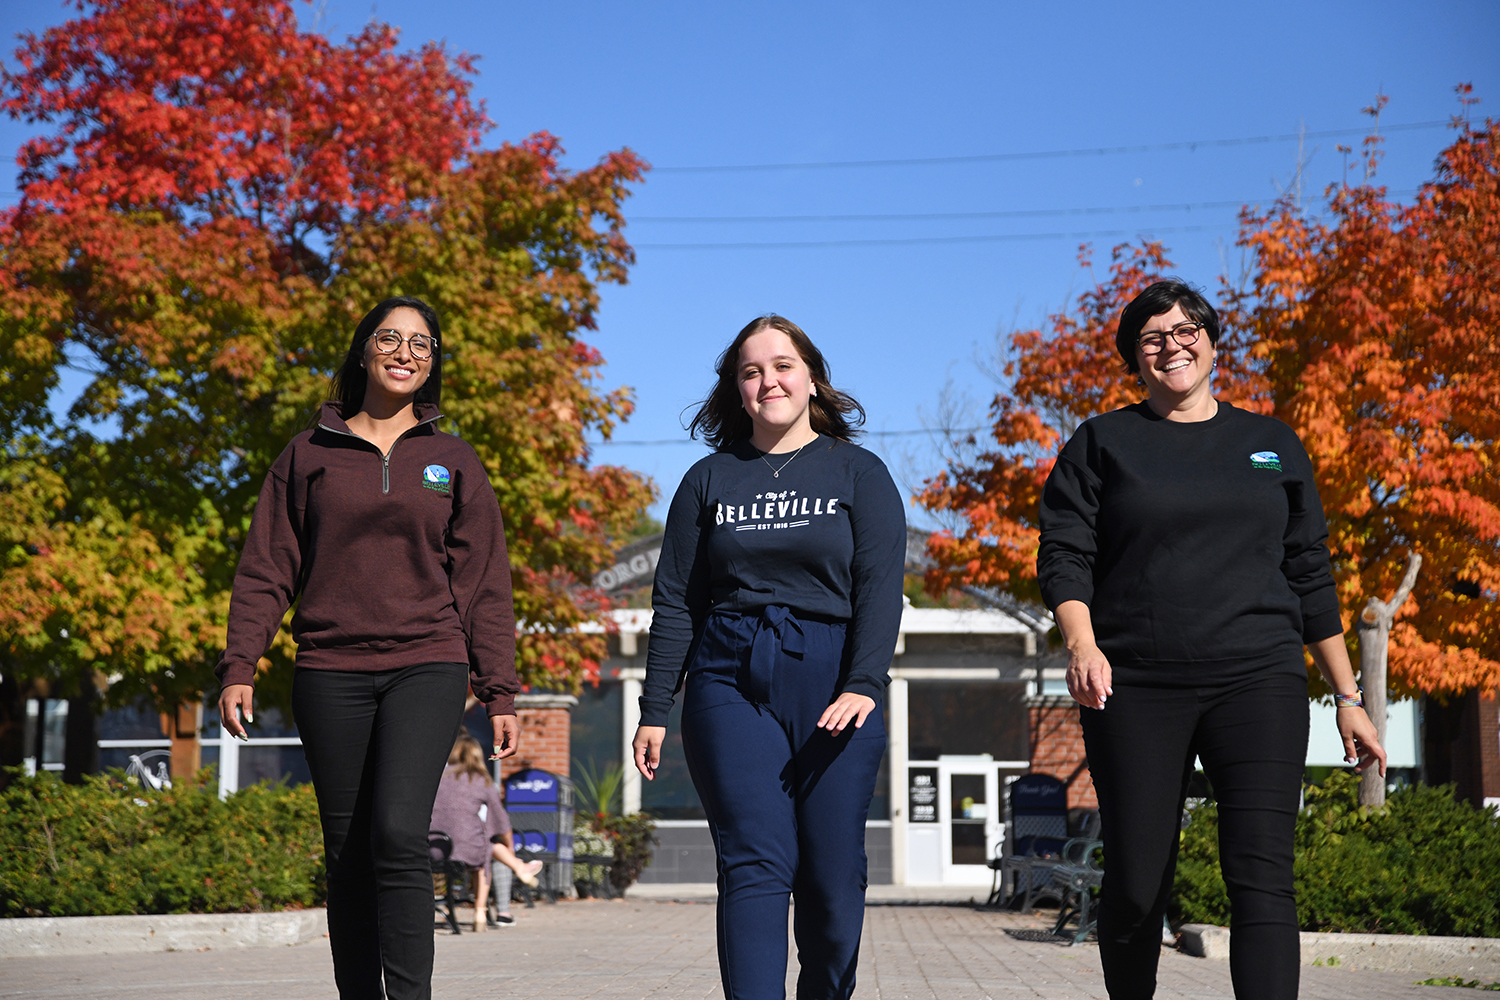 Photo of 3 people waering City of Belleville Merch walking with fall trees in the background.